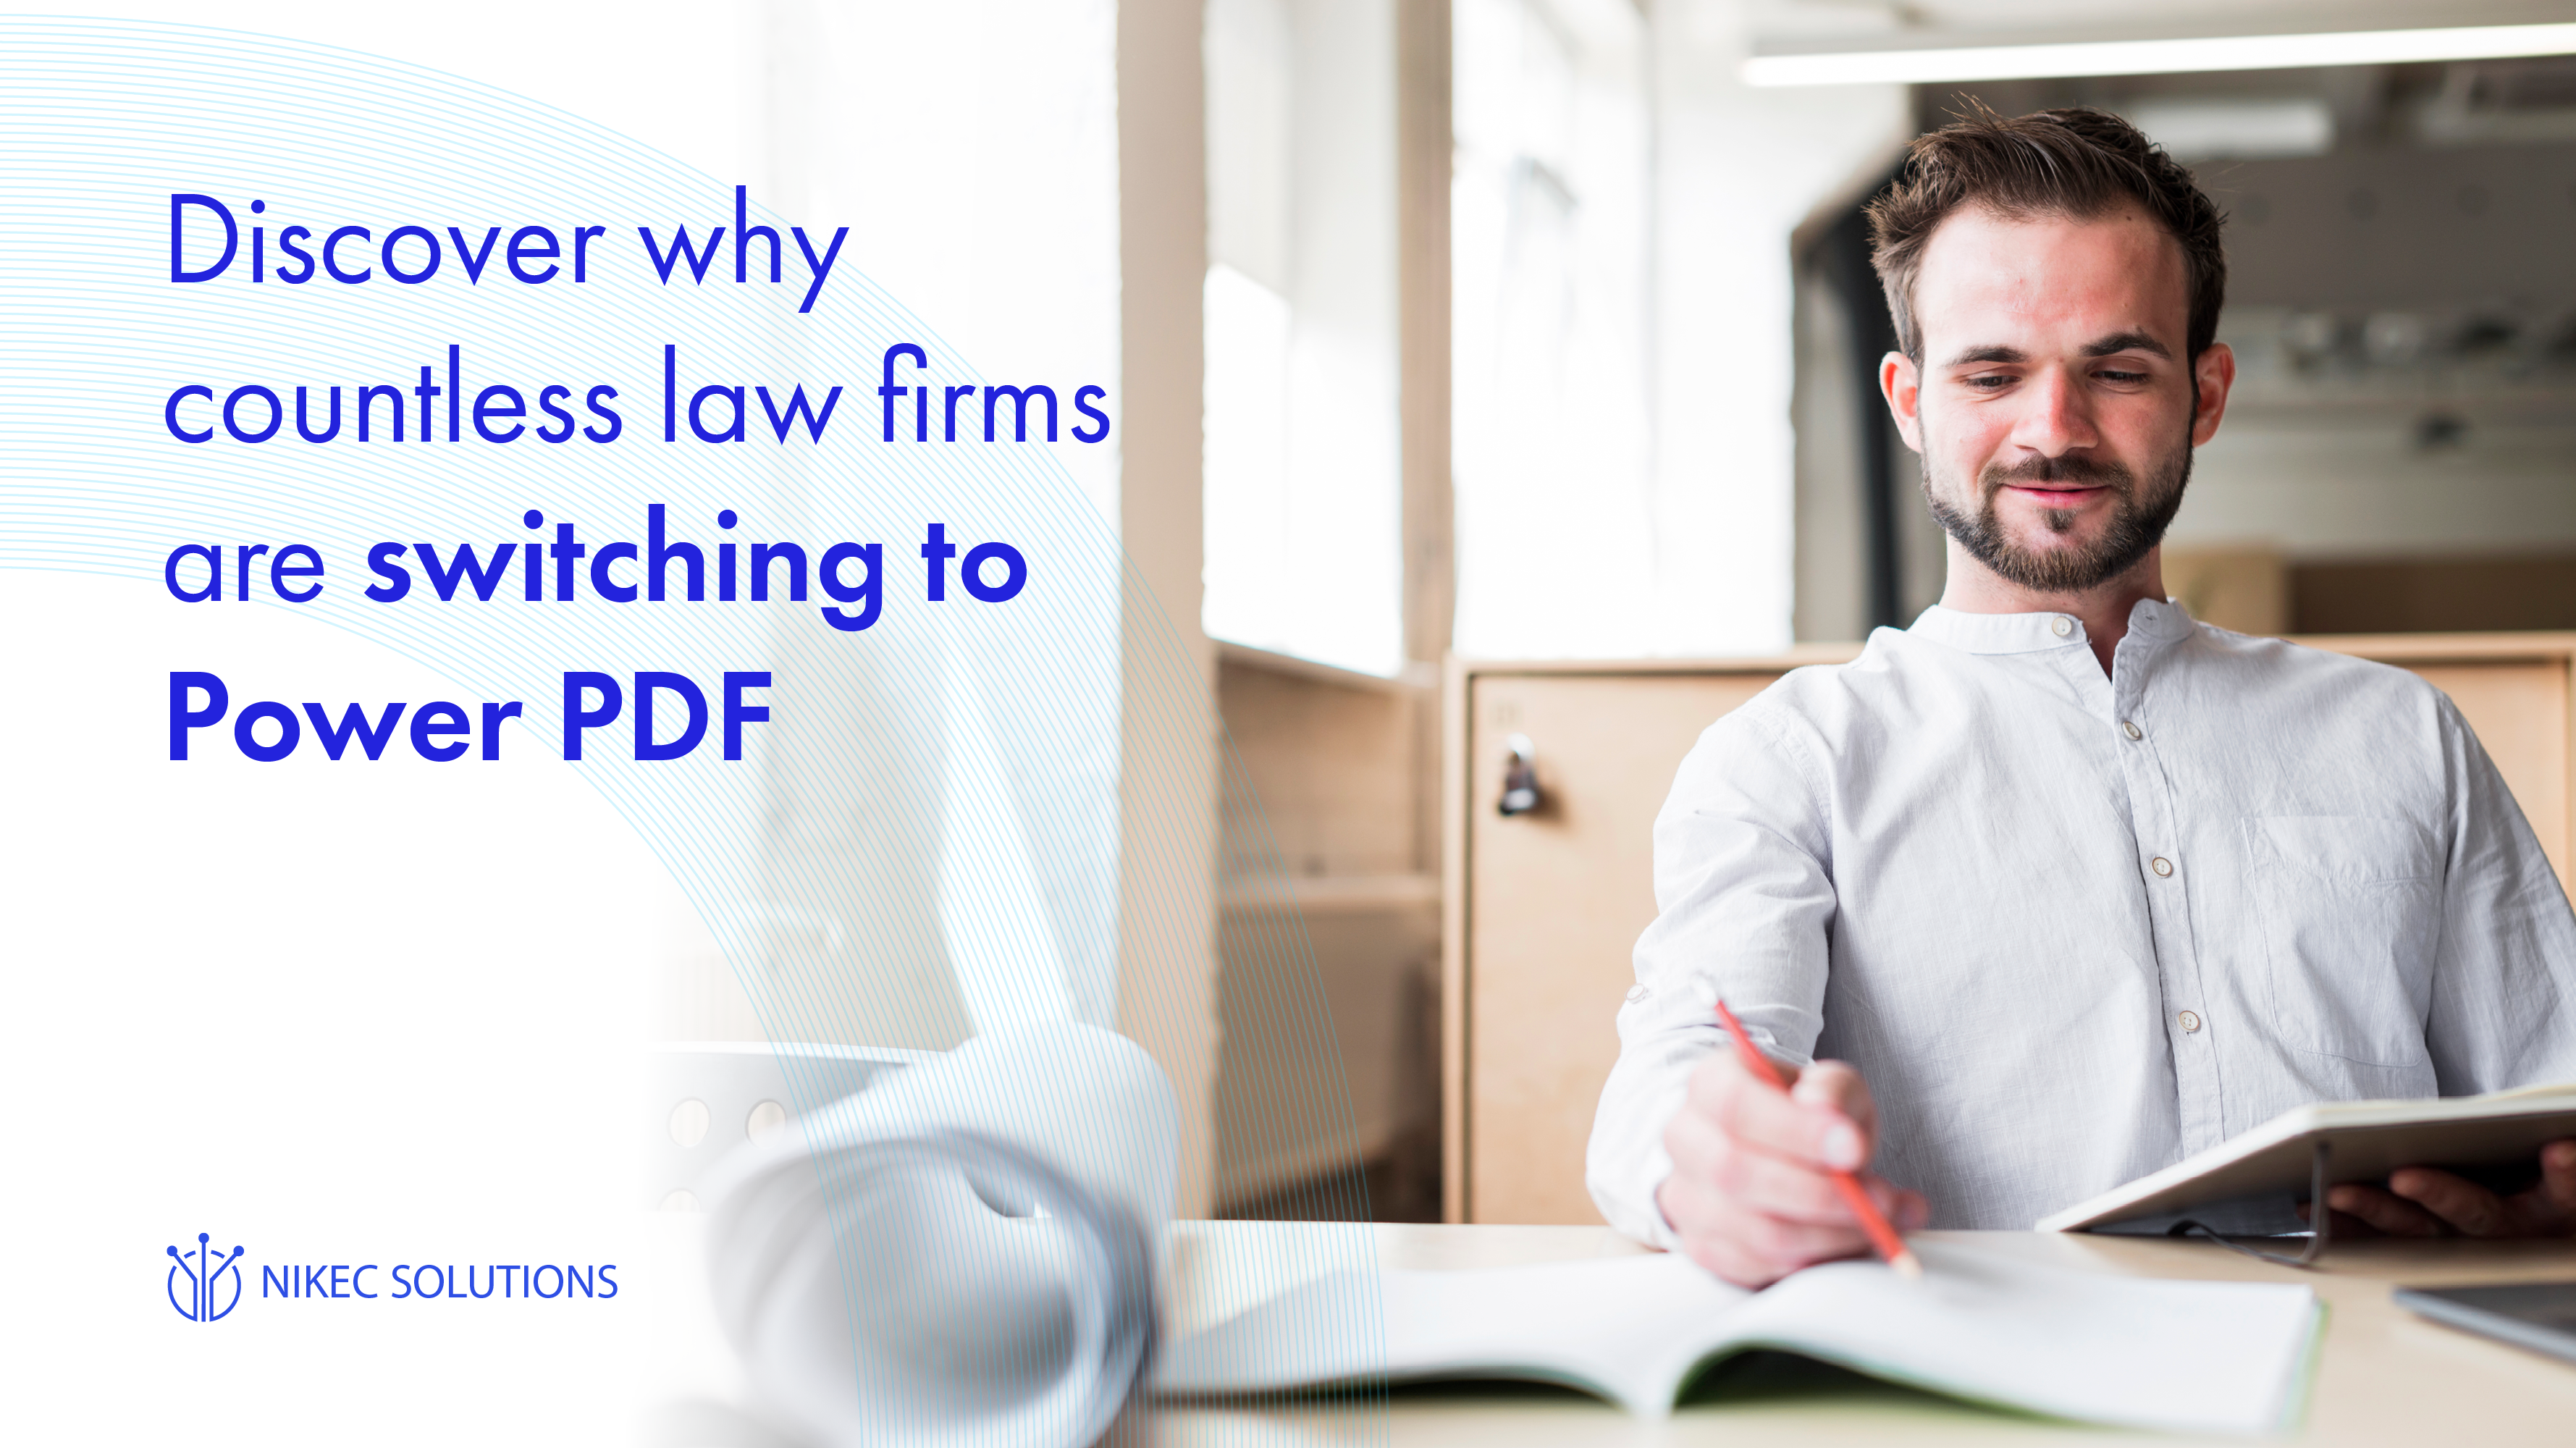 See why countless law firms are switching to Power PDF